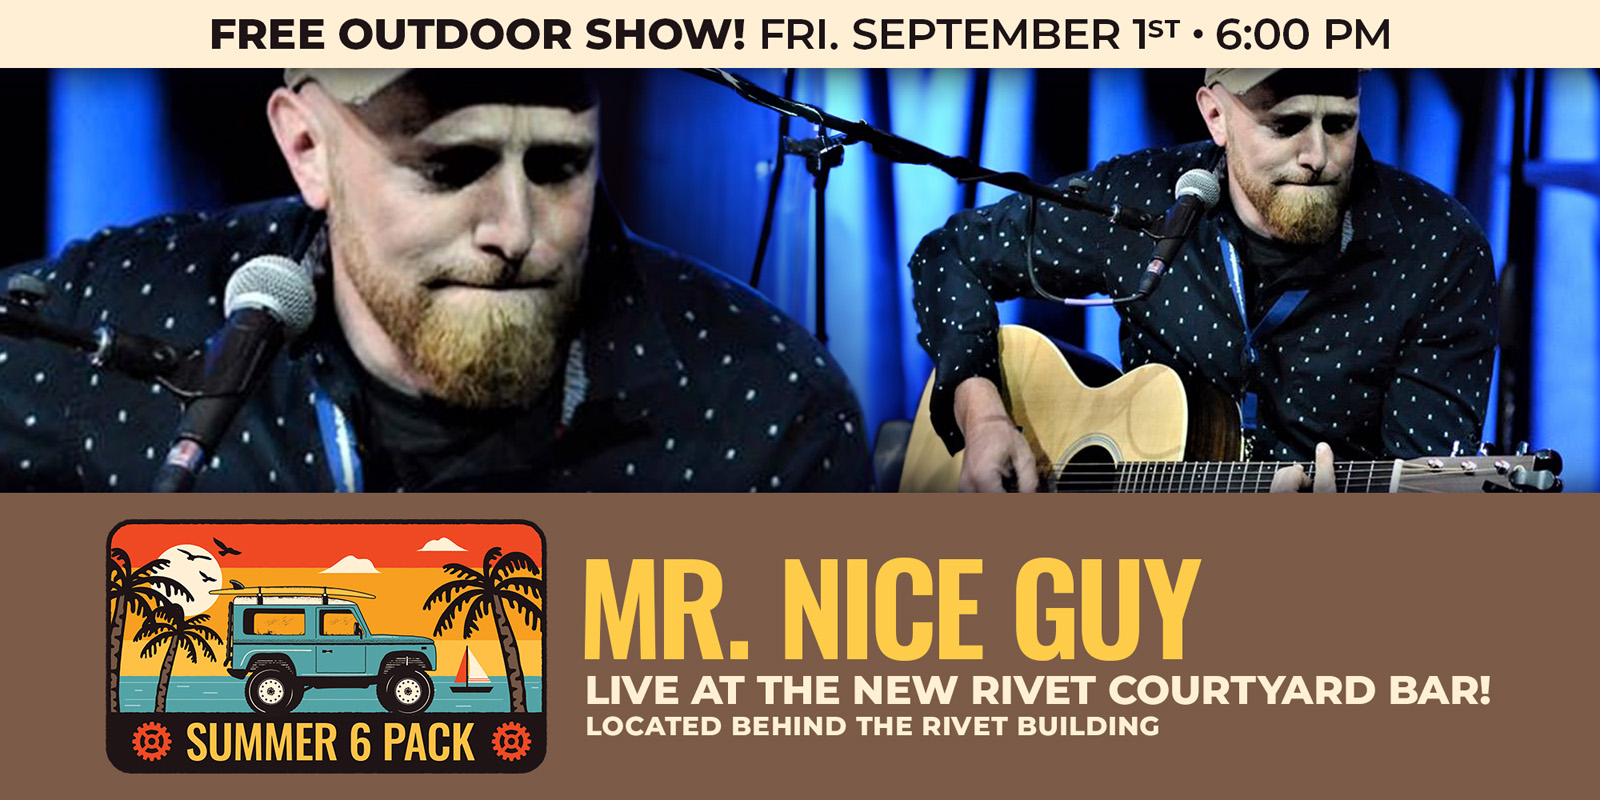 Mr. Nice Guy performing live at Rivet's Courtyard Bar on Friday, September 1st, 2023. Join us: It's a free show!